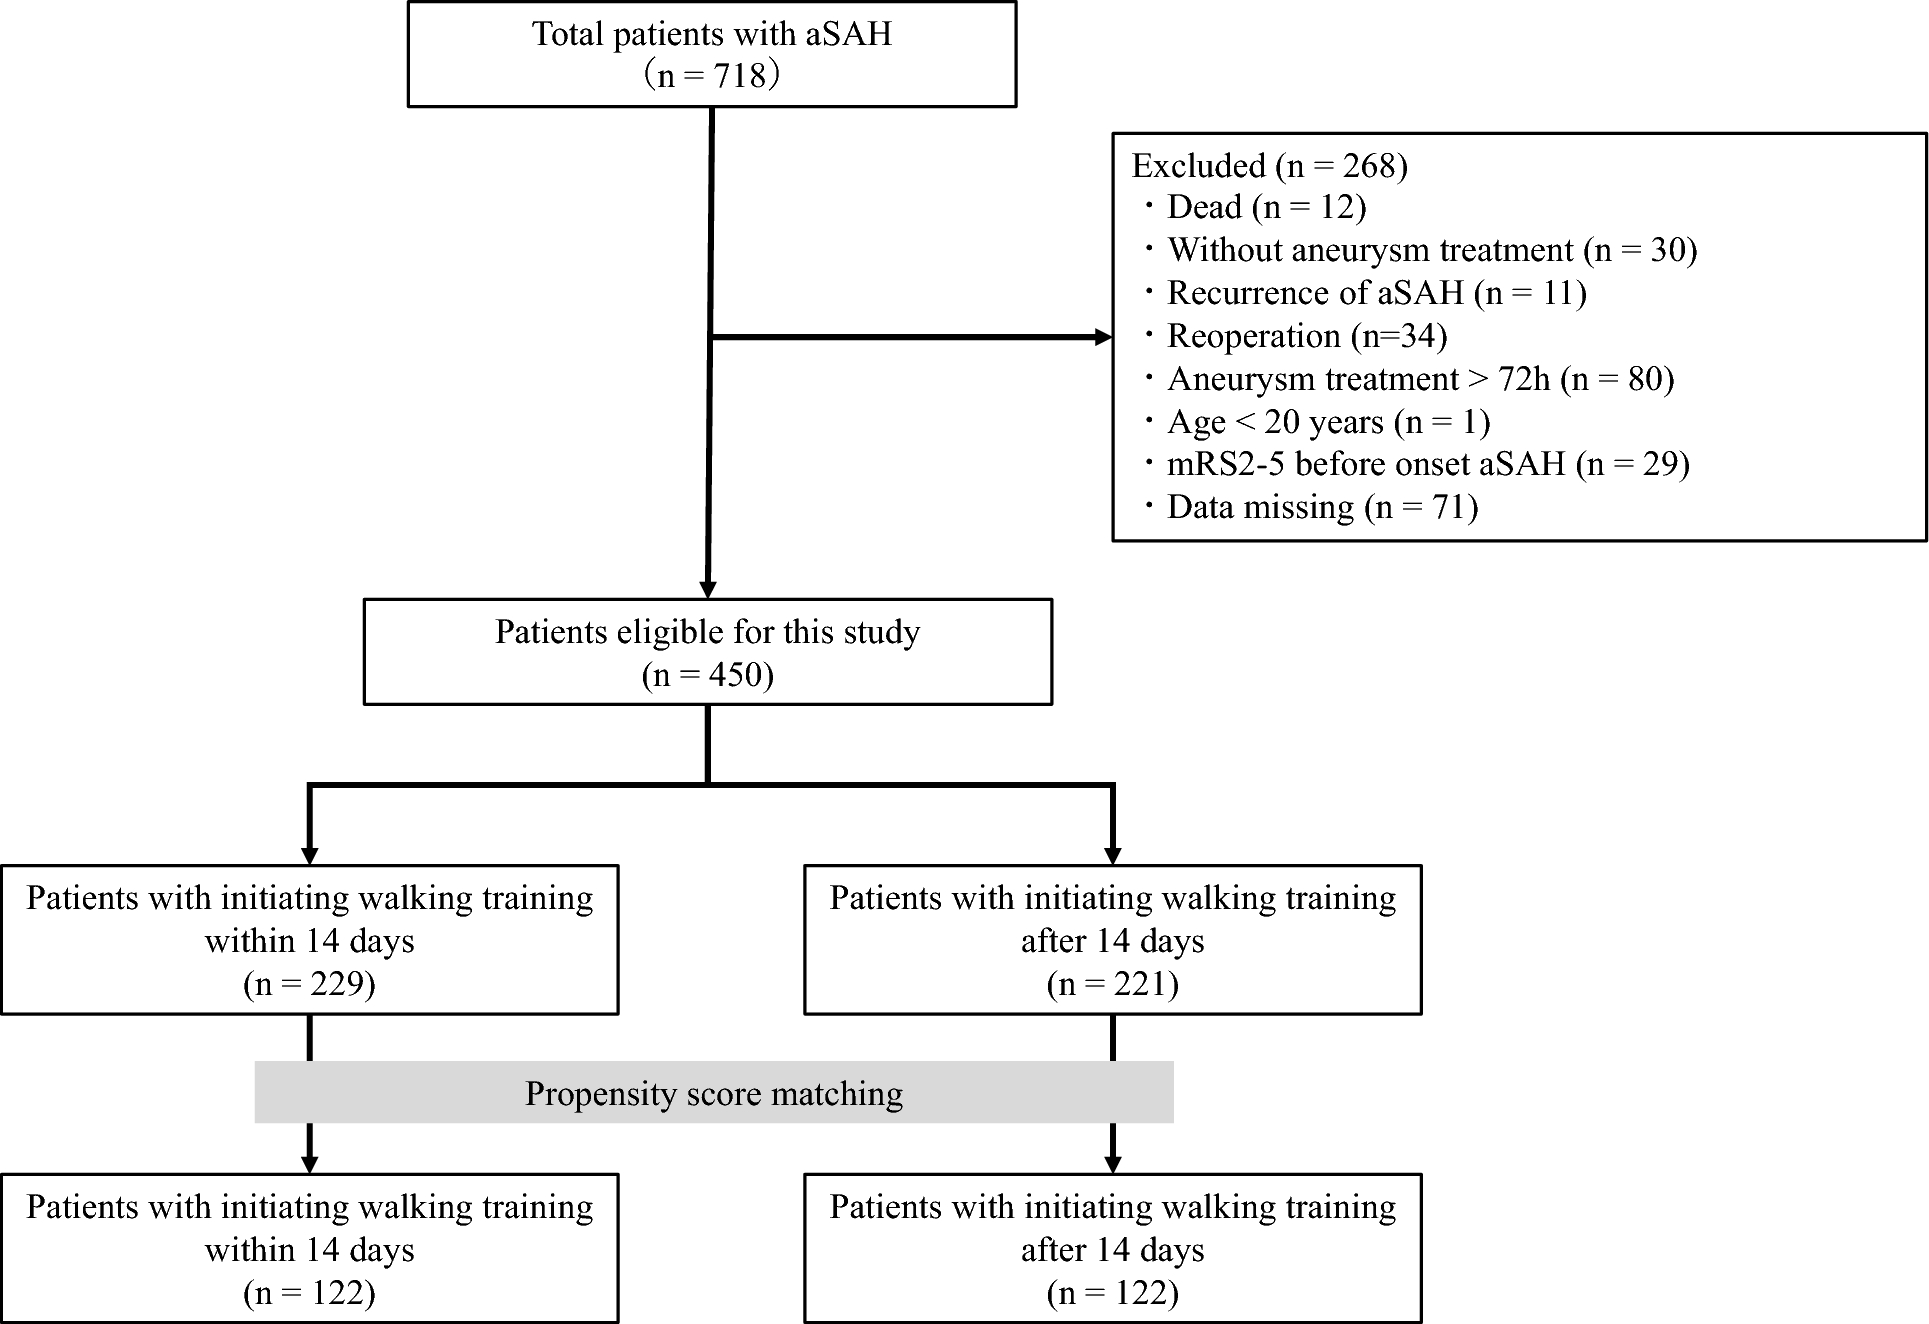 Association Between Early Mobilization and Functional Outcomes in Patients with Aneurysmal Subarachnoid Hemorrhage: A Multicenter Retrospective Propensity Score-Matched Study